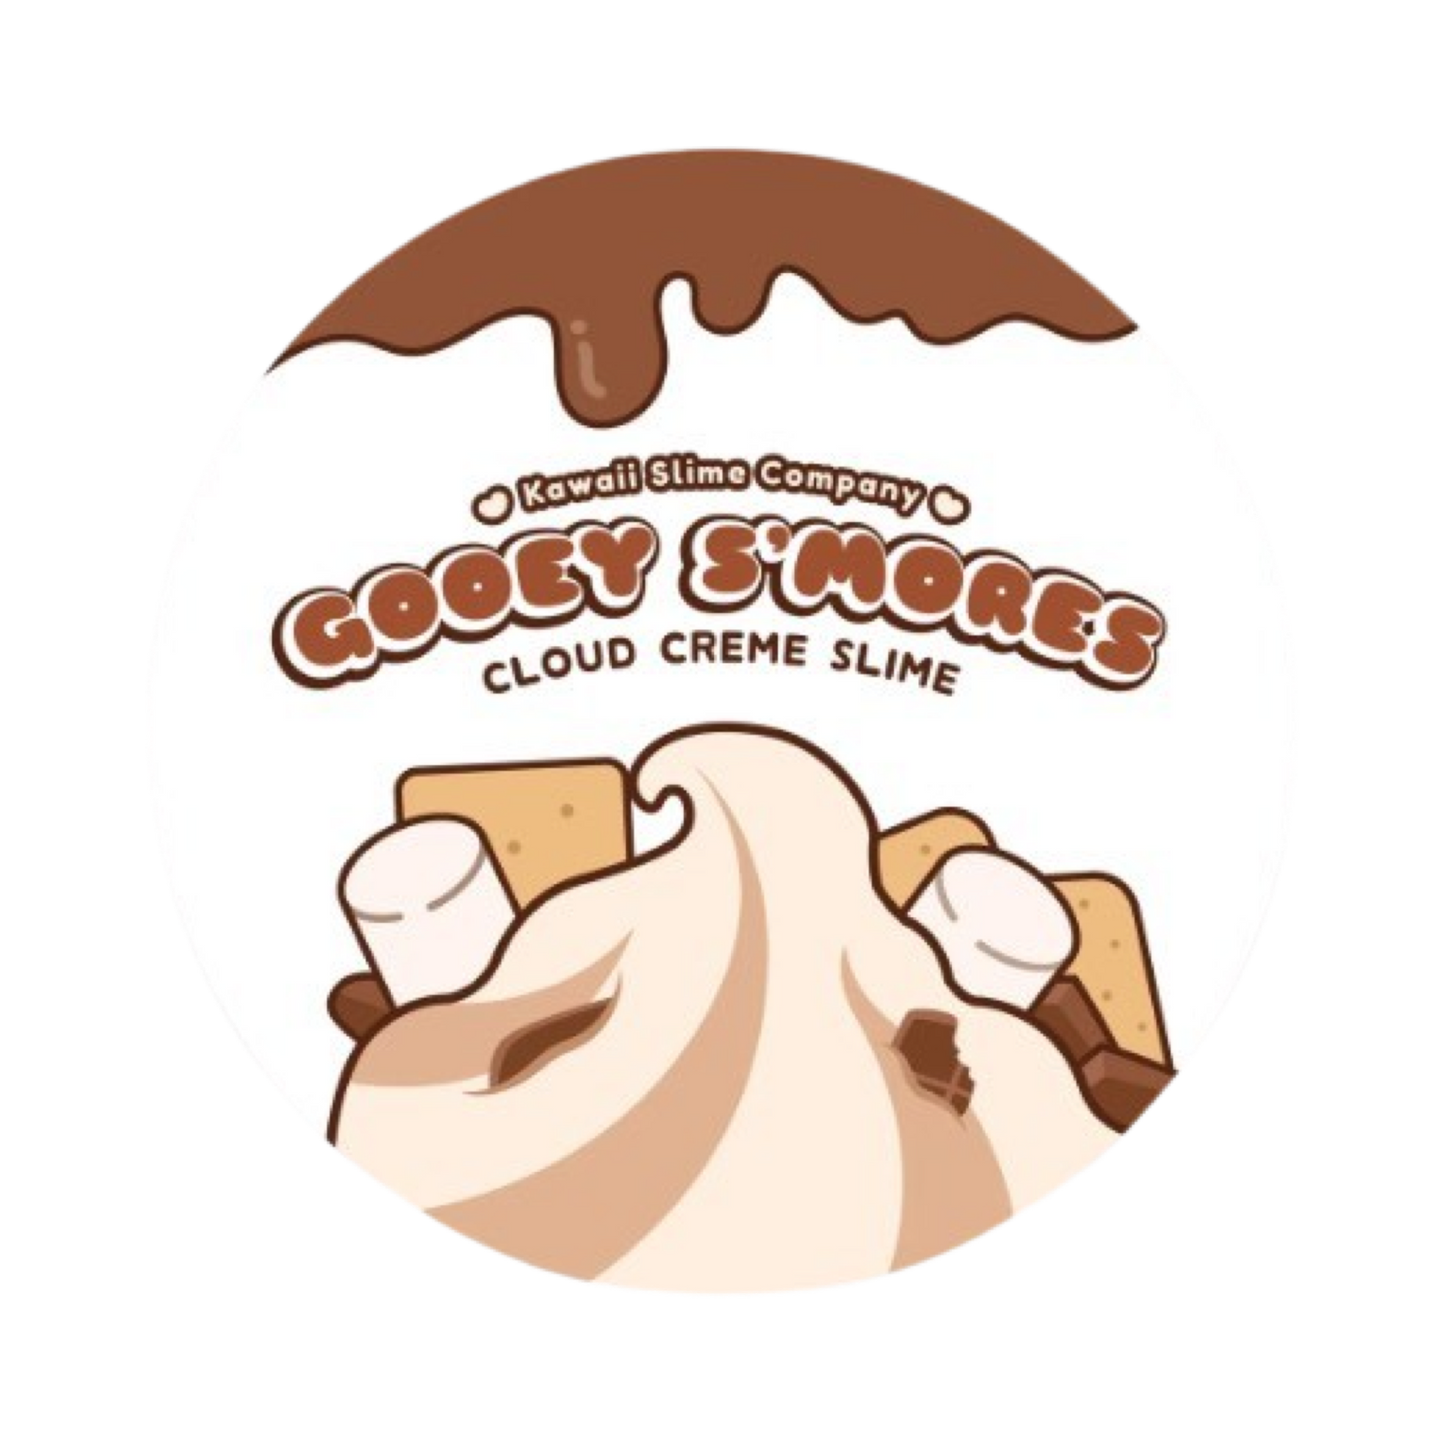 Gooey S'mores Cloud Creme Slime